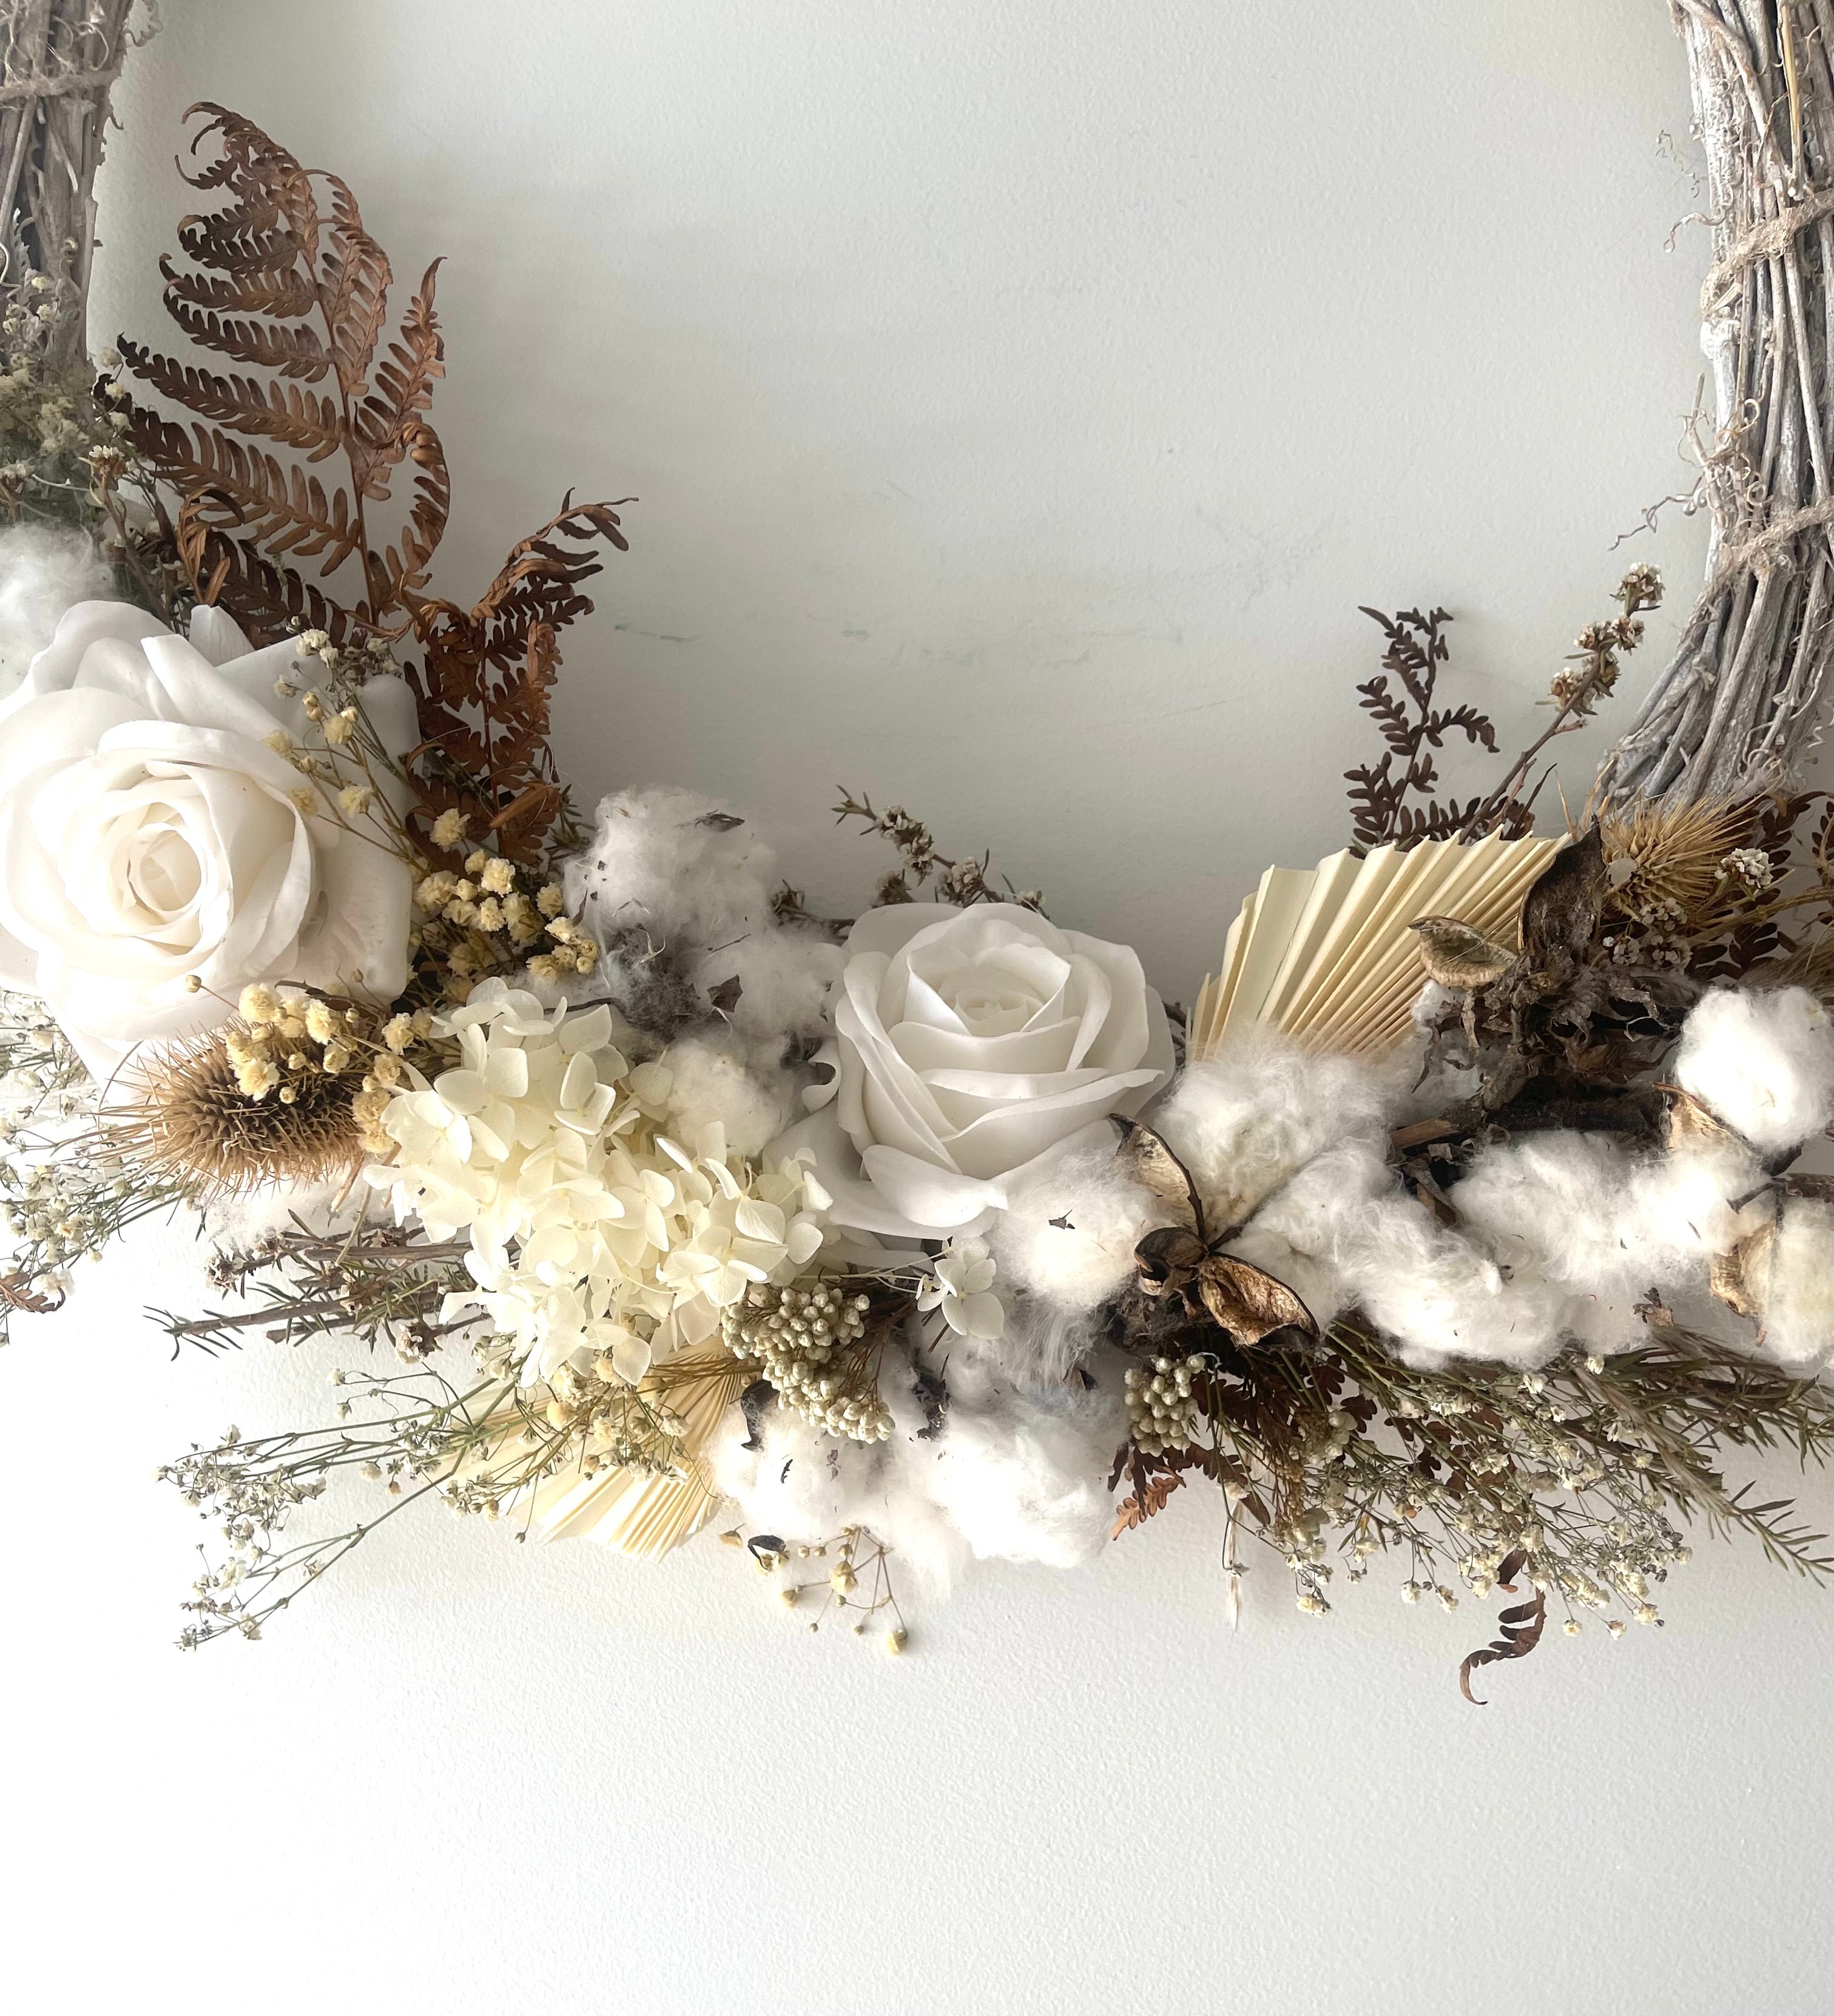 Everlasting floral wreath - snowy white rose.